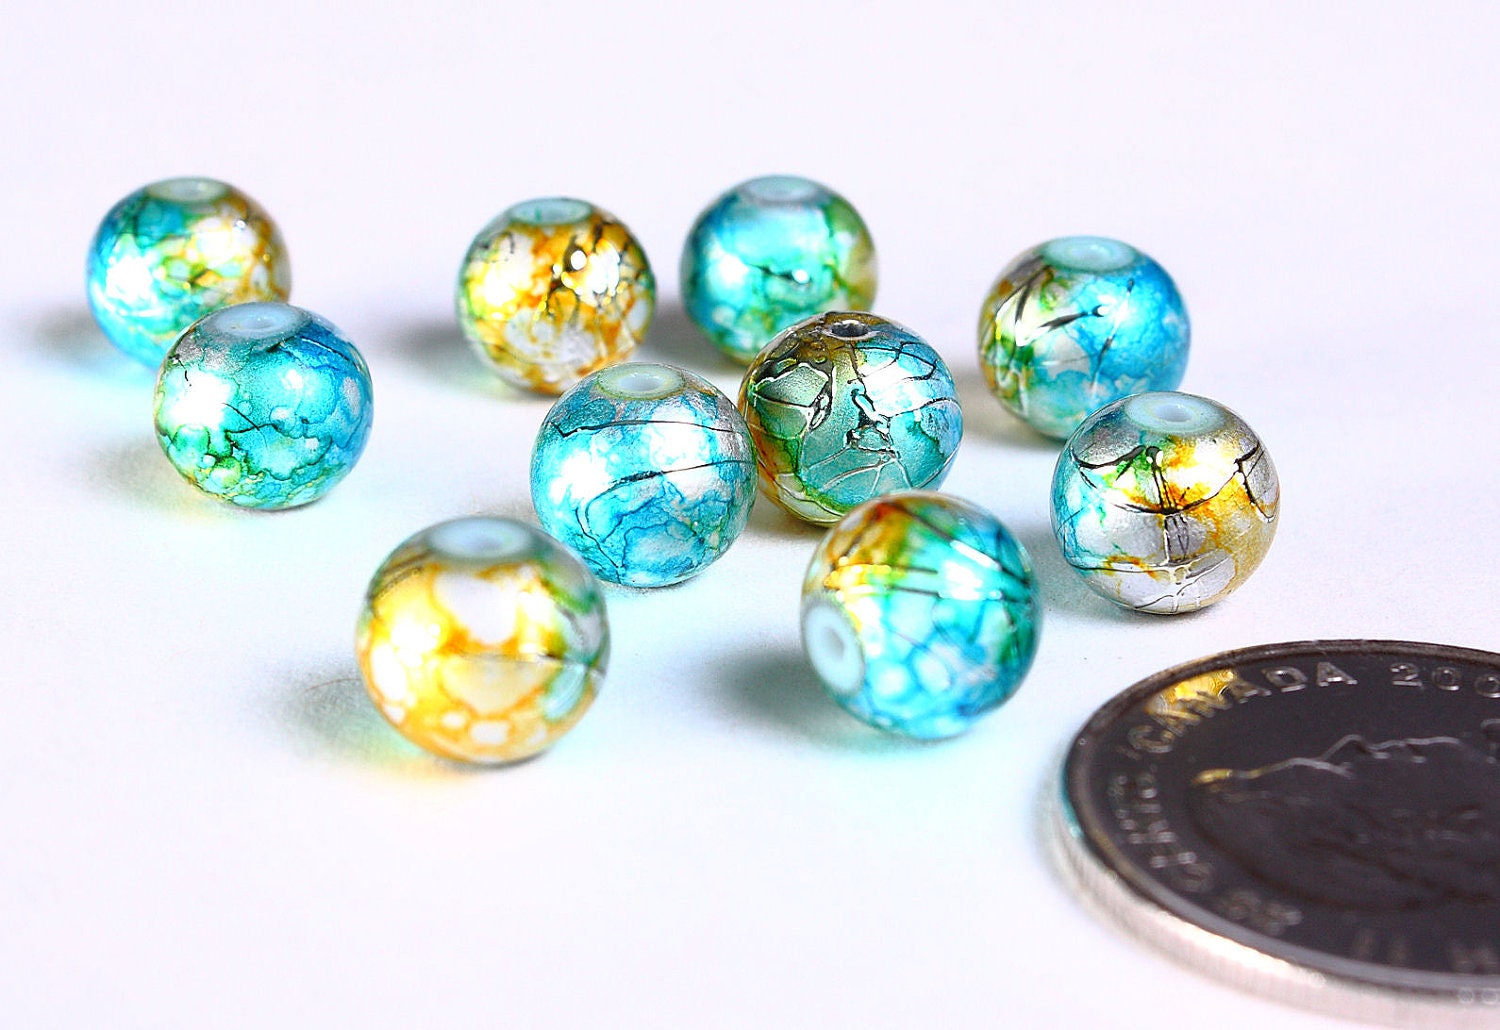 8mm Drawbench Green Yellow Blue Silver Beads 8mm Round Glass - Etsy